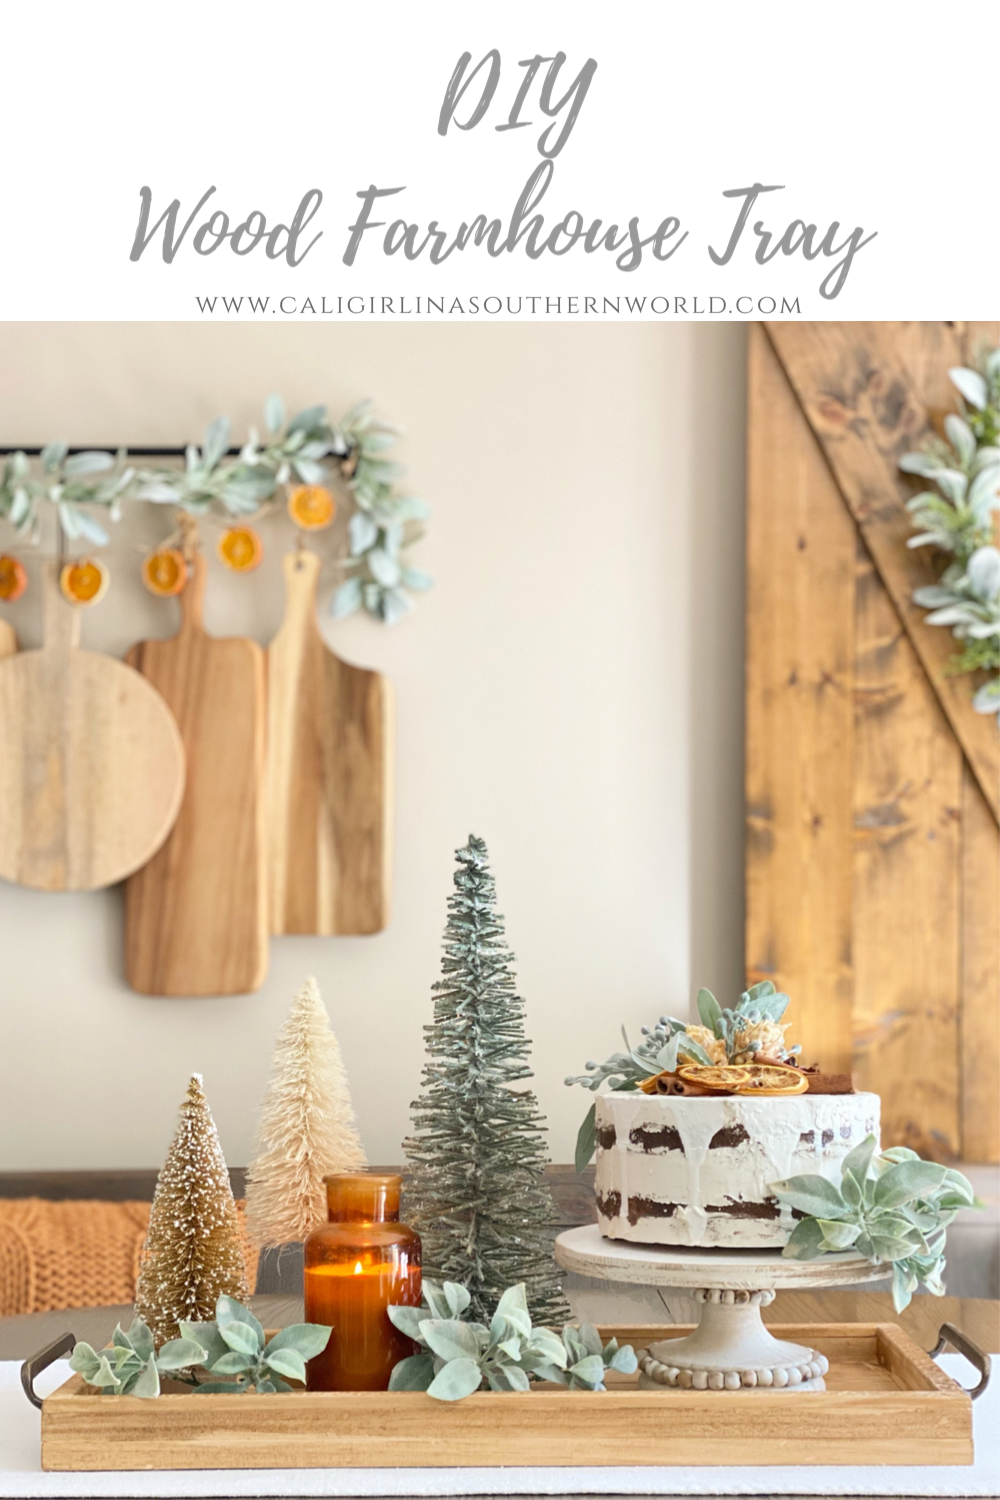 DIY wood farmhouse tray centerpiece styled with bottle brush Christmas trees, a candle, and a cake on it.